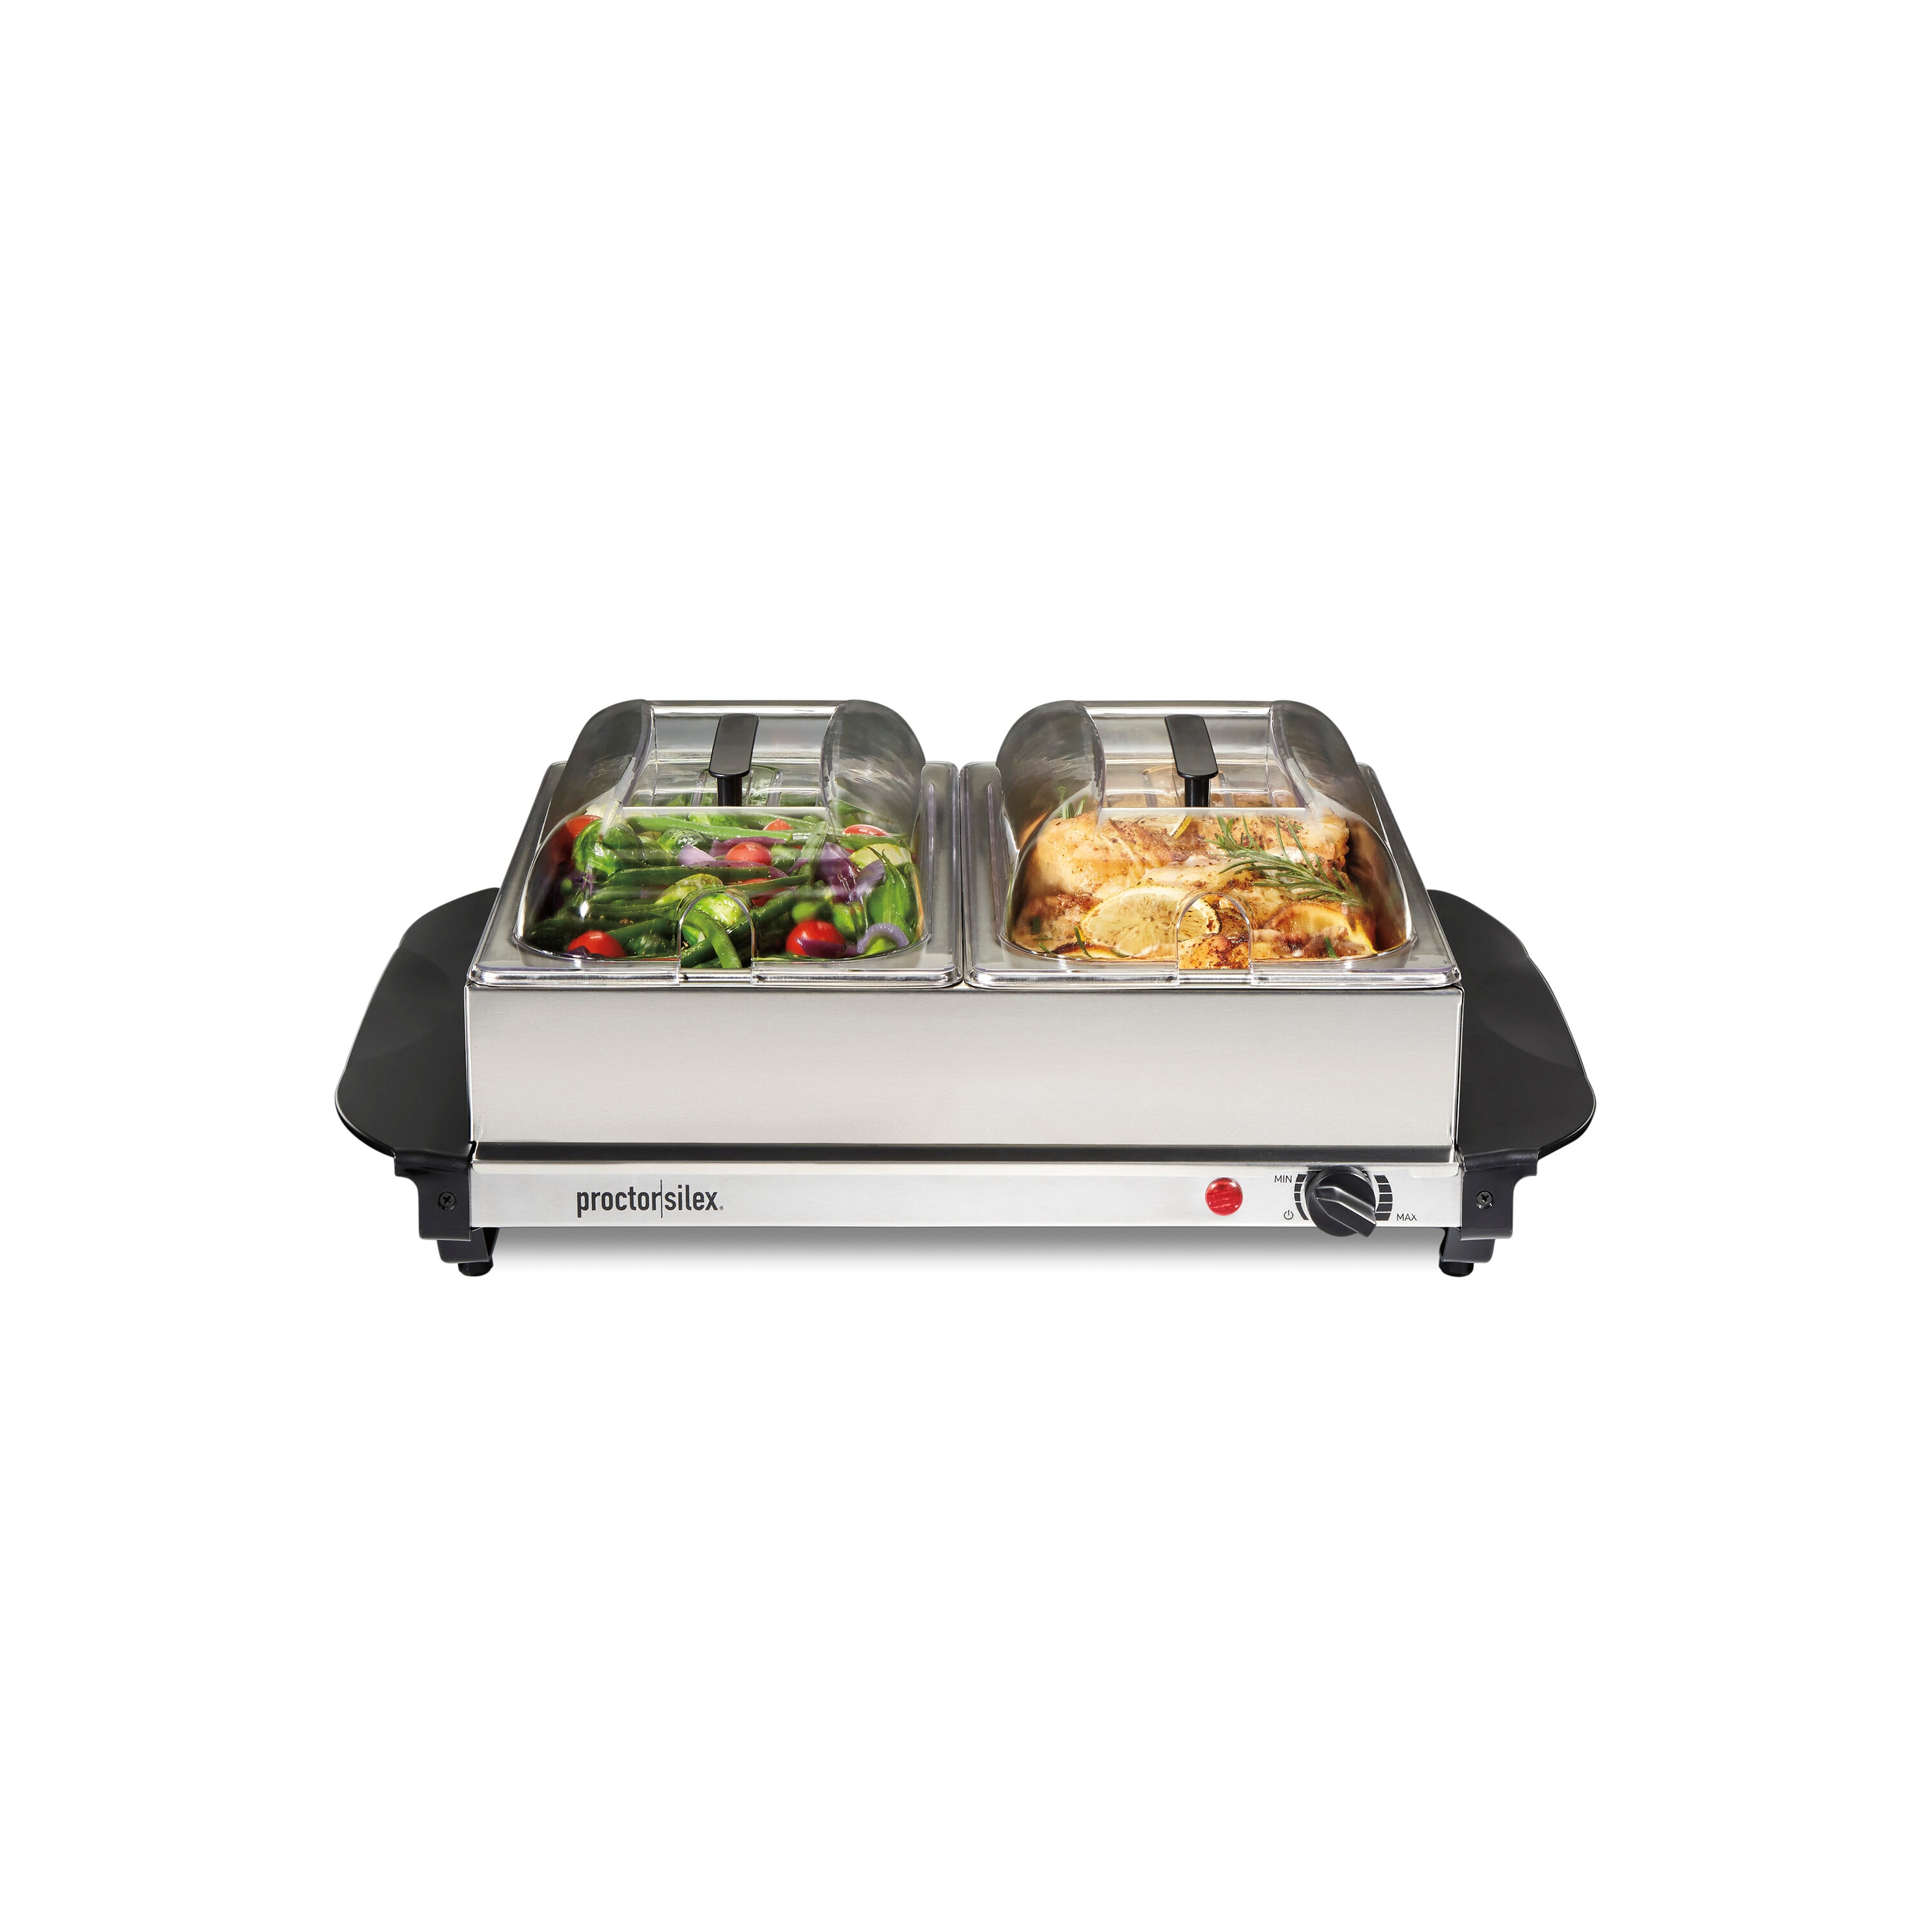 MegaChef Buffet Server & Food Warmer with 3 Removable Sectional Trays , Heated Warming Tray